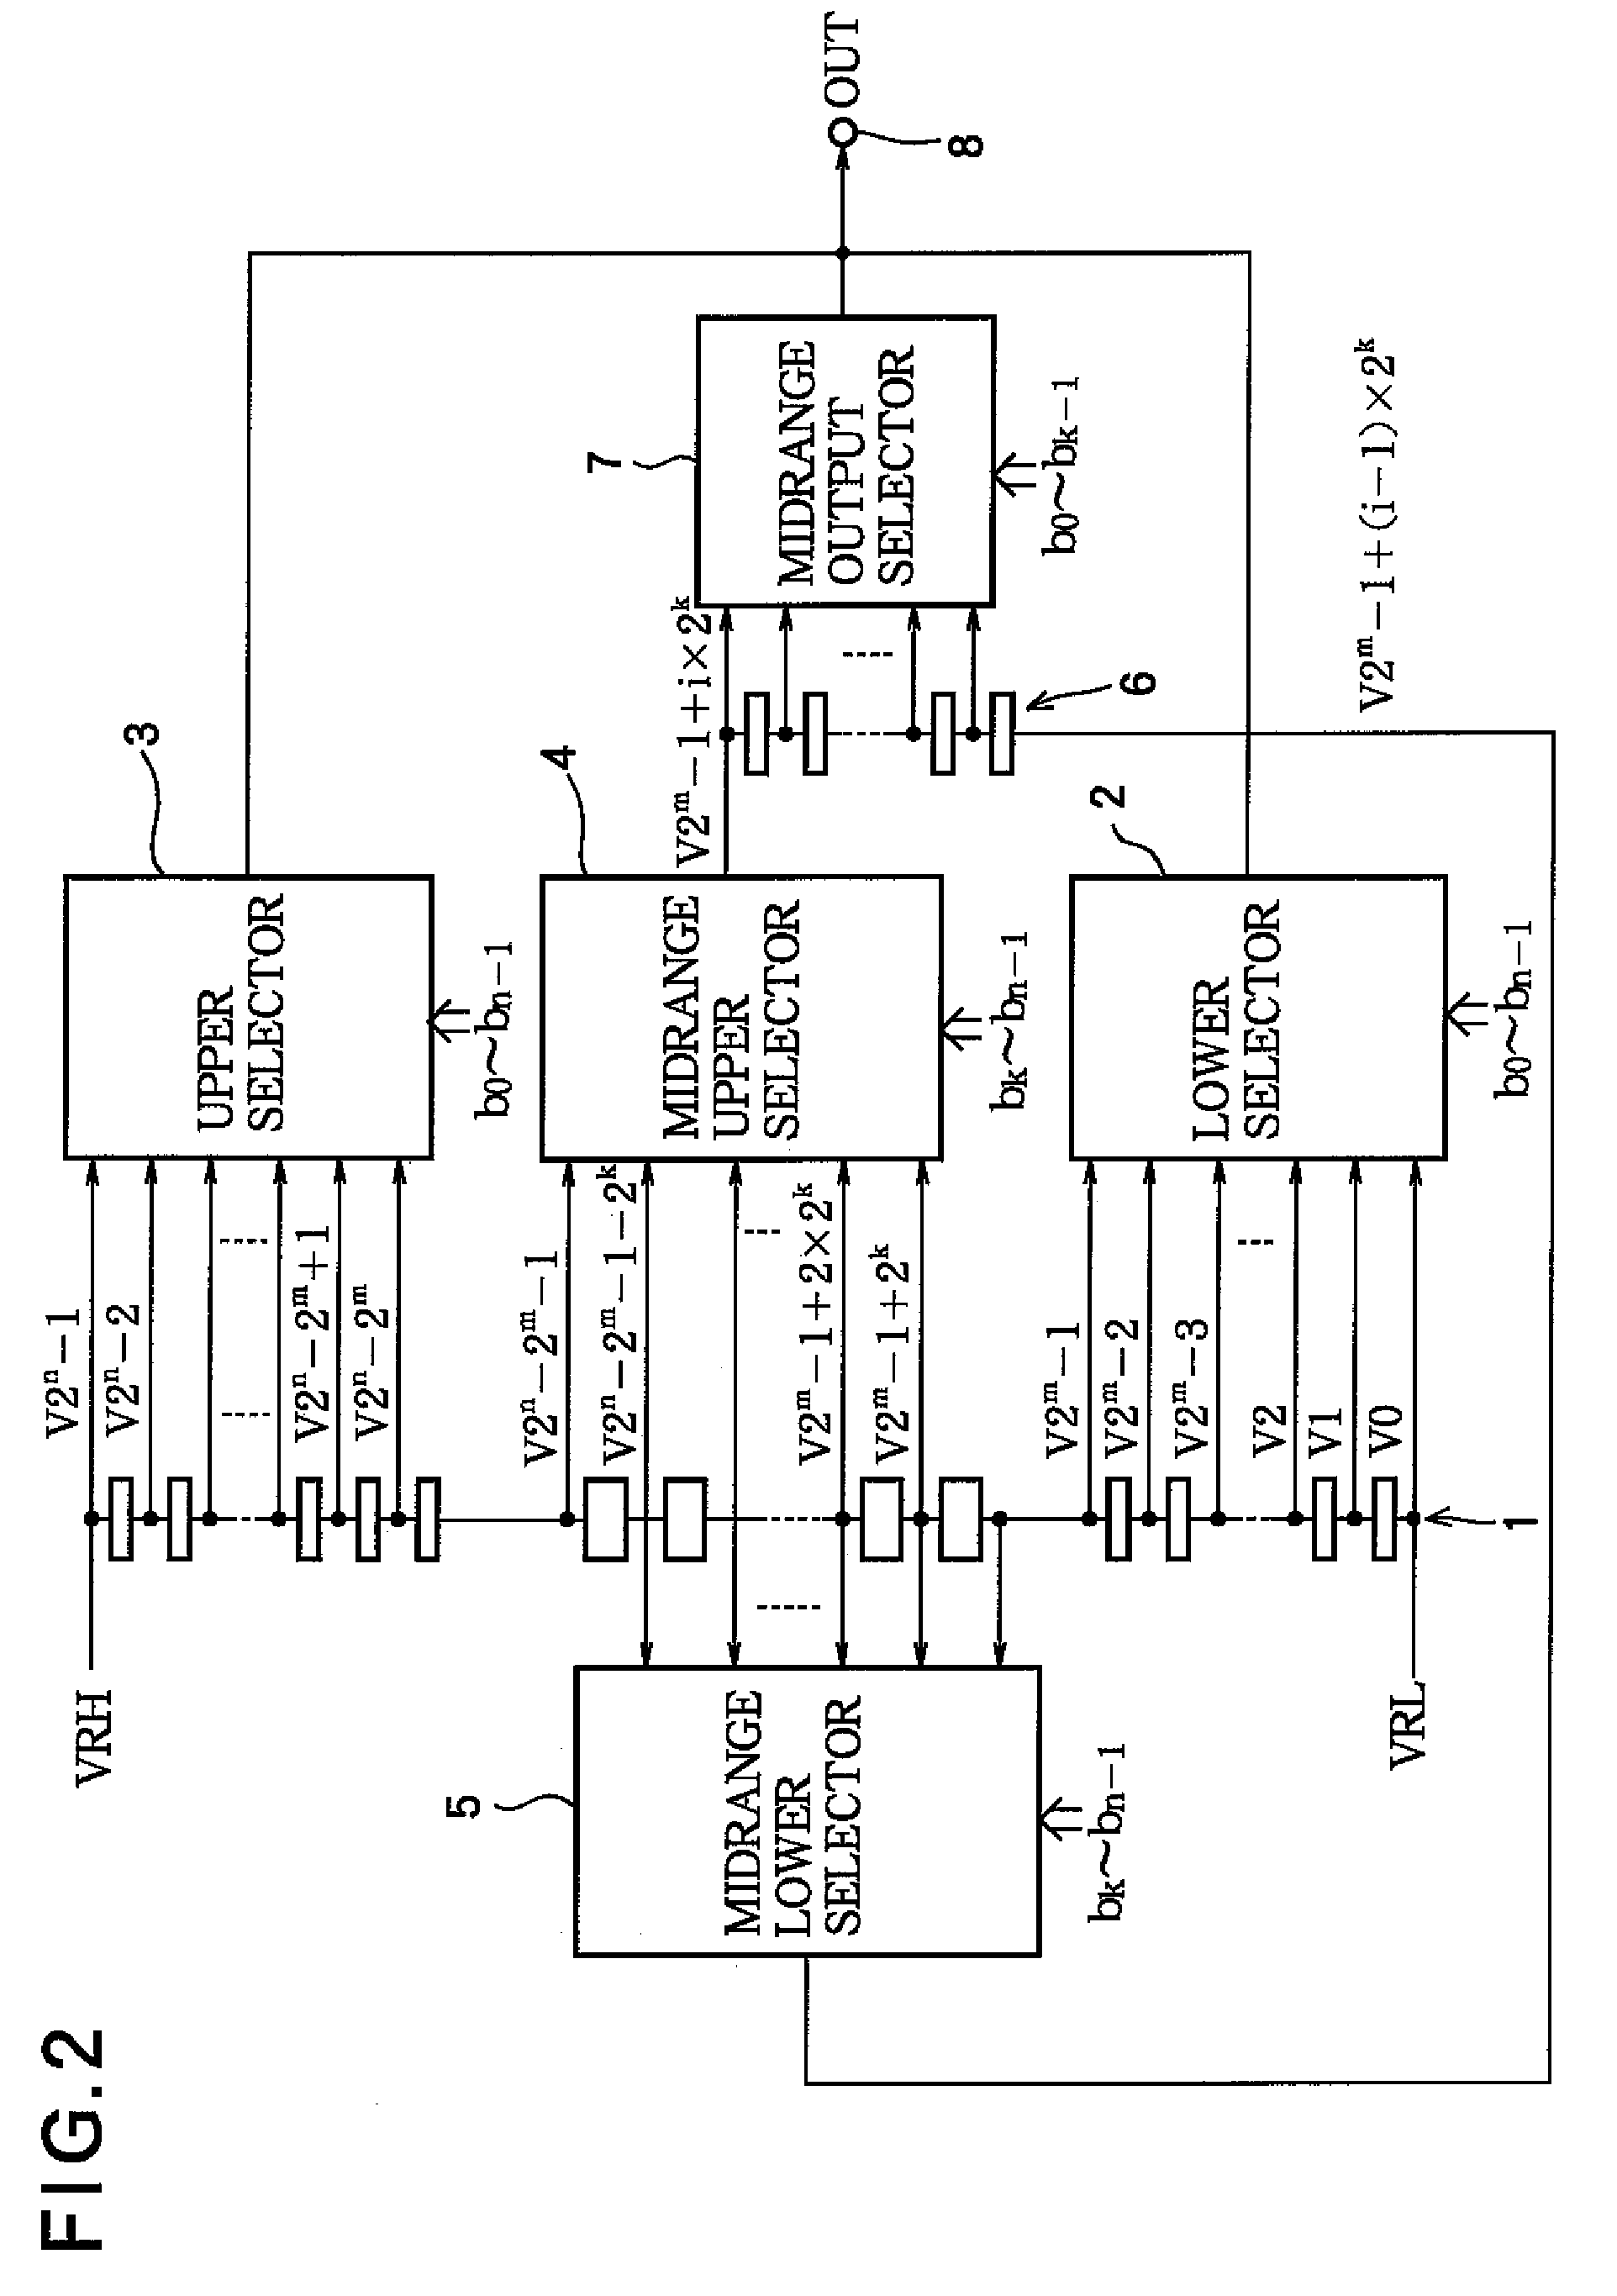 Digital-to-analog converter having resistor string with ranges to reduce circuit elements